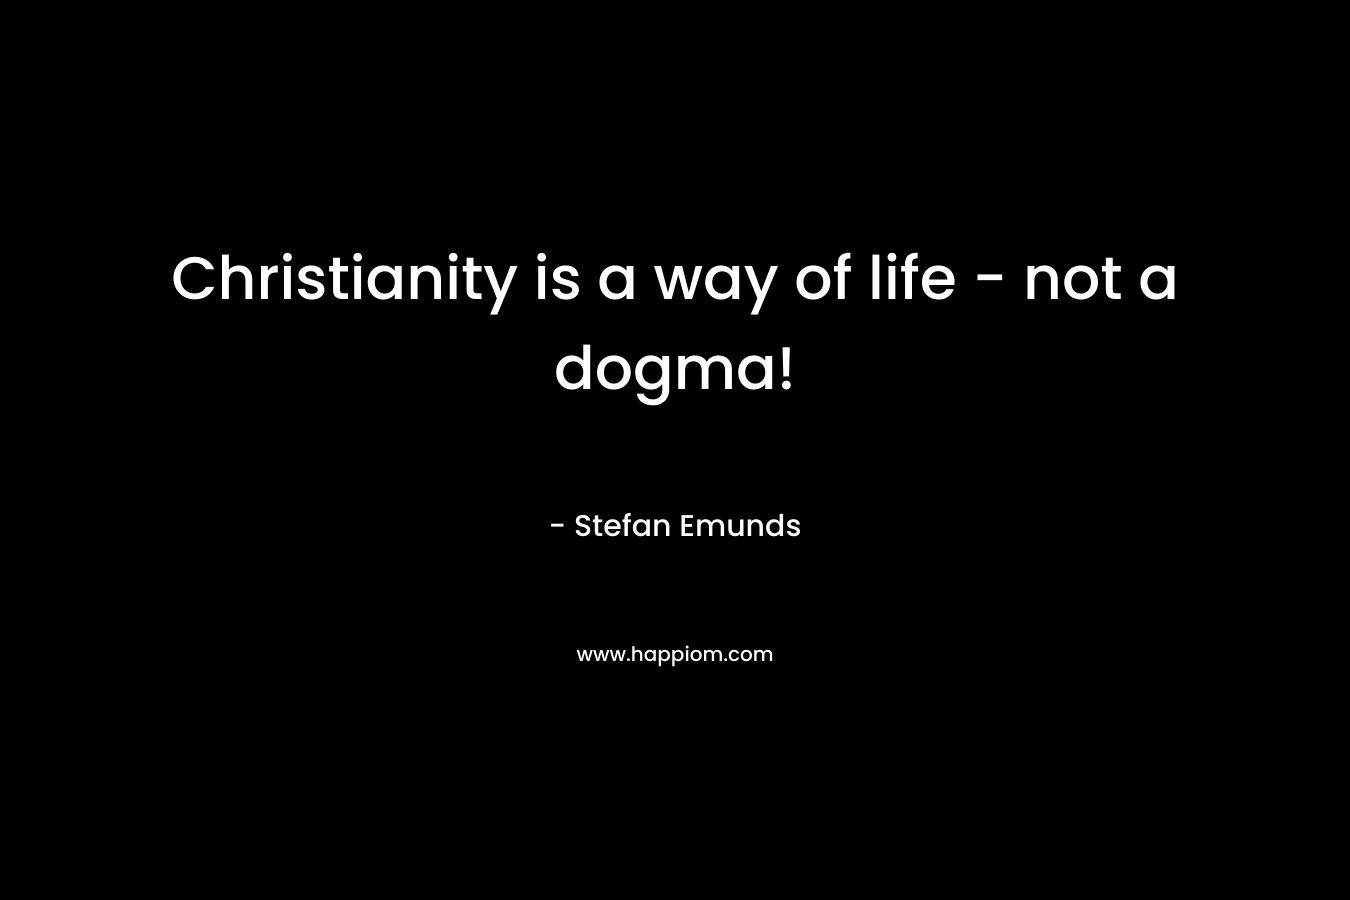 Christianity is a way of life - not a dogma!